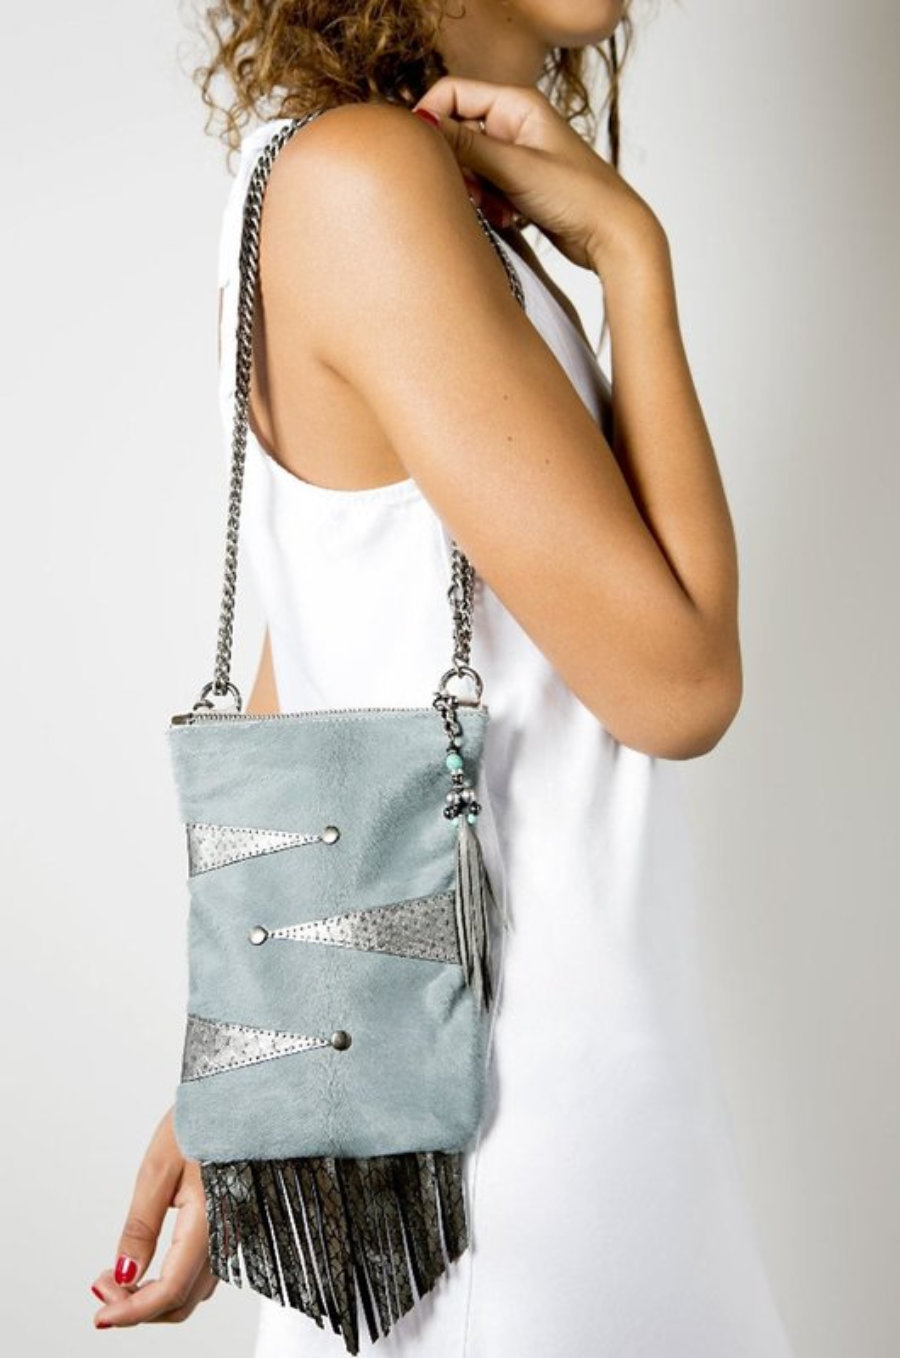 Handmade Leather Party Handbag In Sky Blue And Metallic Grey With Fringe Detail